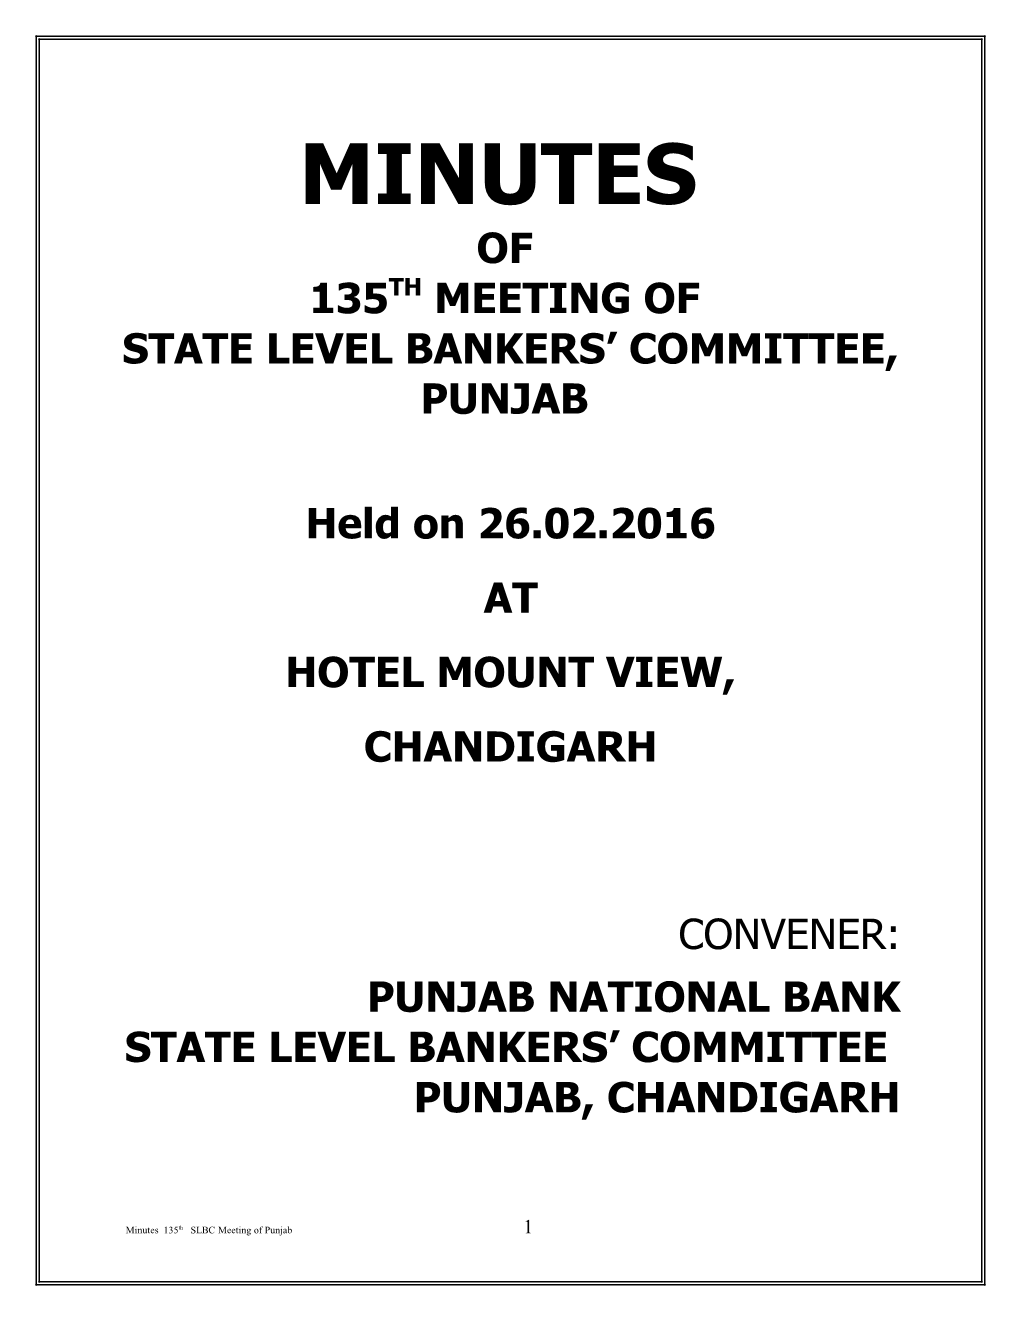 State Level Bankers Committee, Punjab